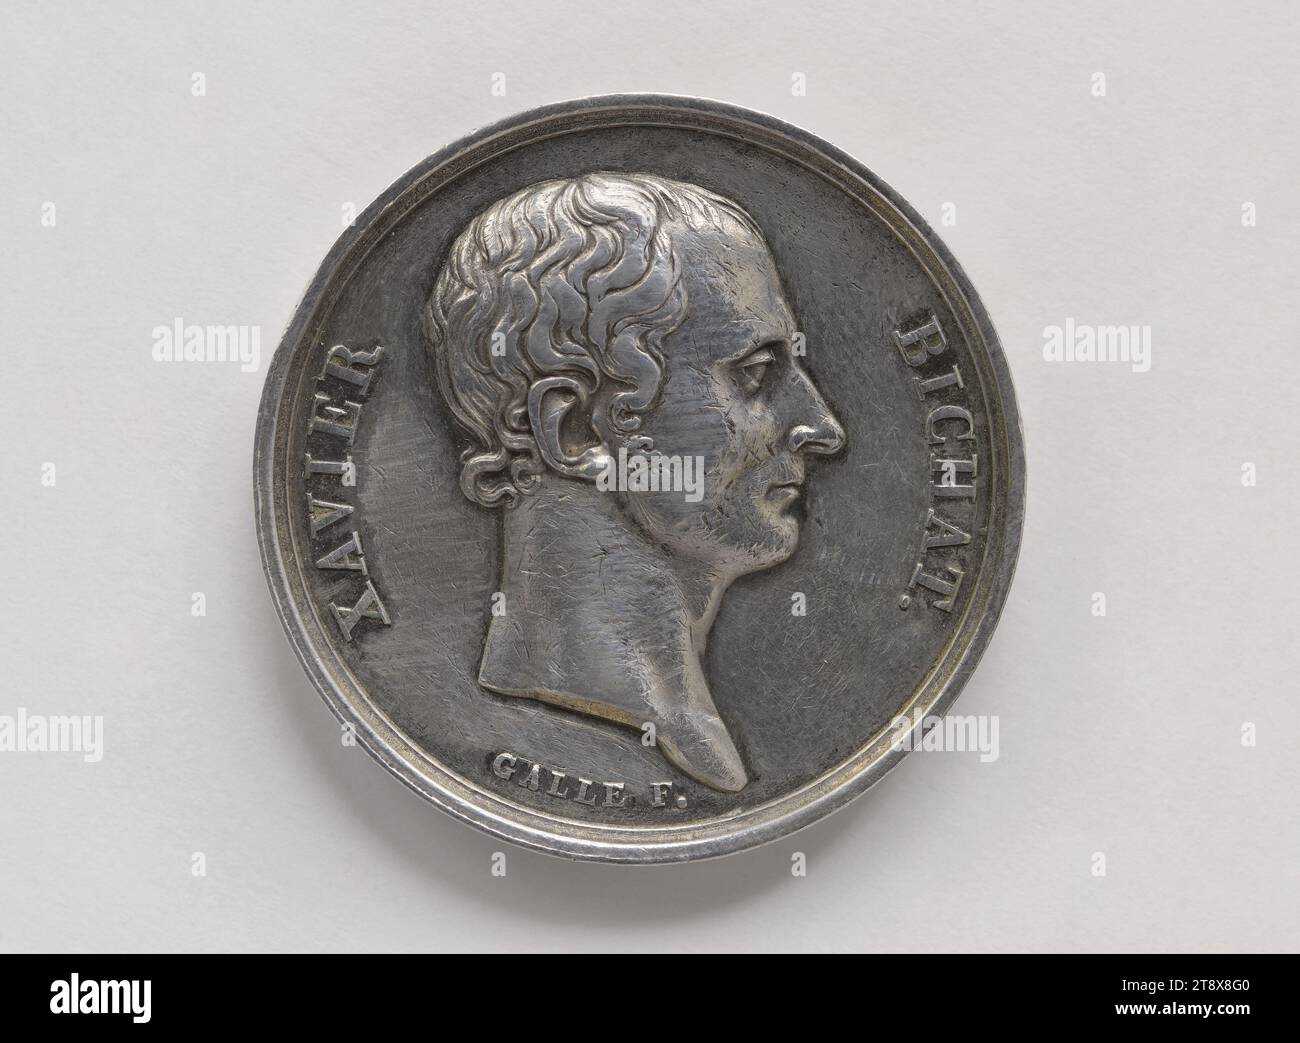 Marie François Xavier Bichat (1771-1802), French biologist and physiologist, 1807, Galle, André, Engraver in medals, In 1807, Numismatics, Medal, Dimensions - Work: Diameter: 2.7 cm Stock Photo